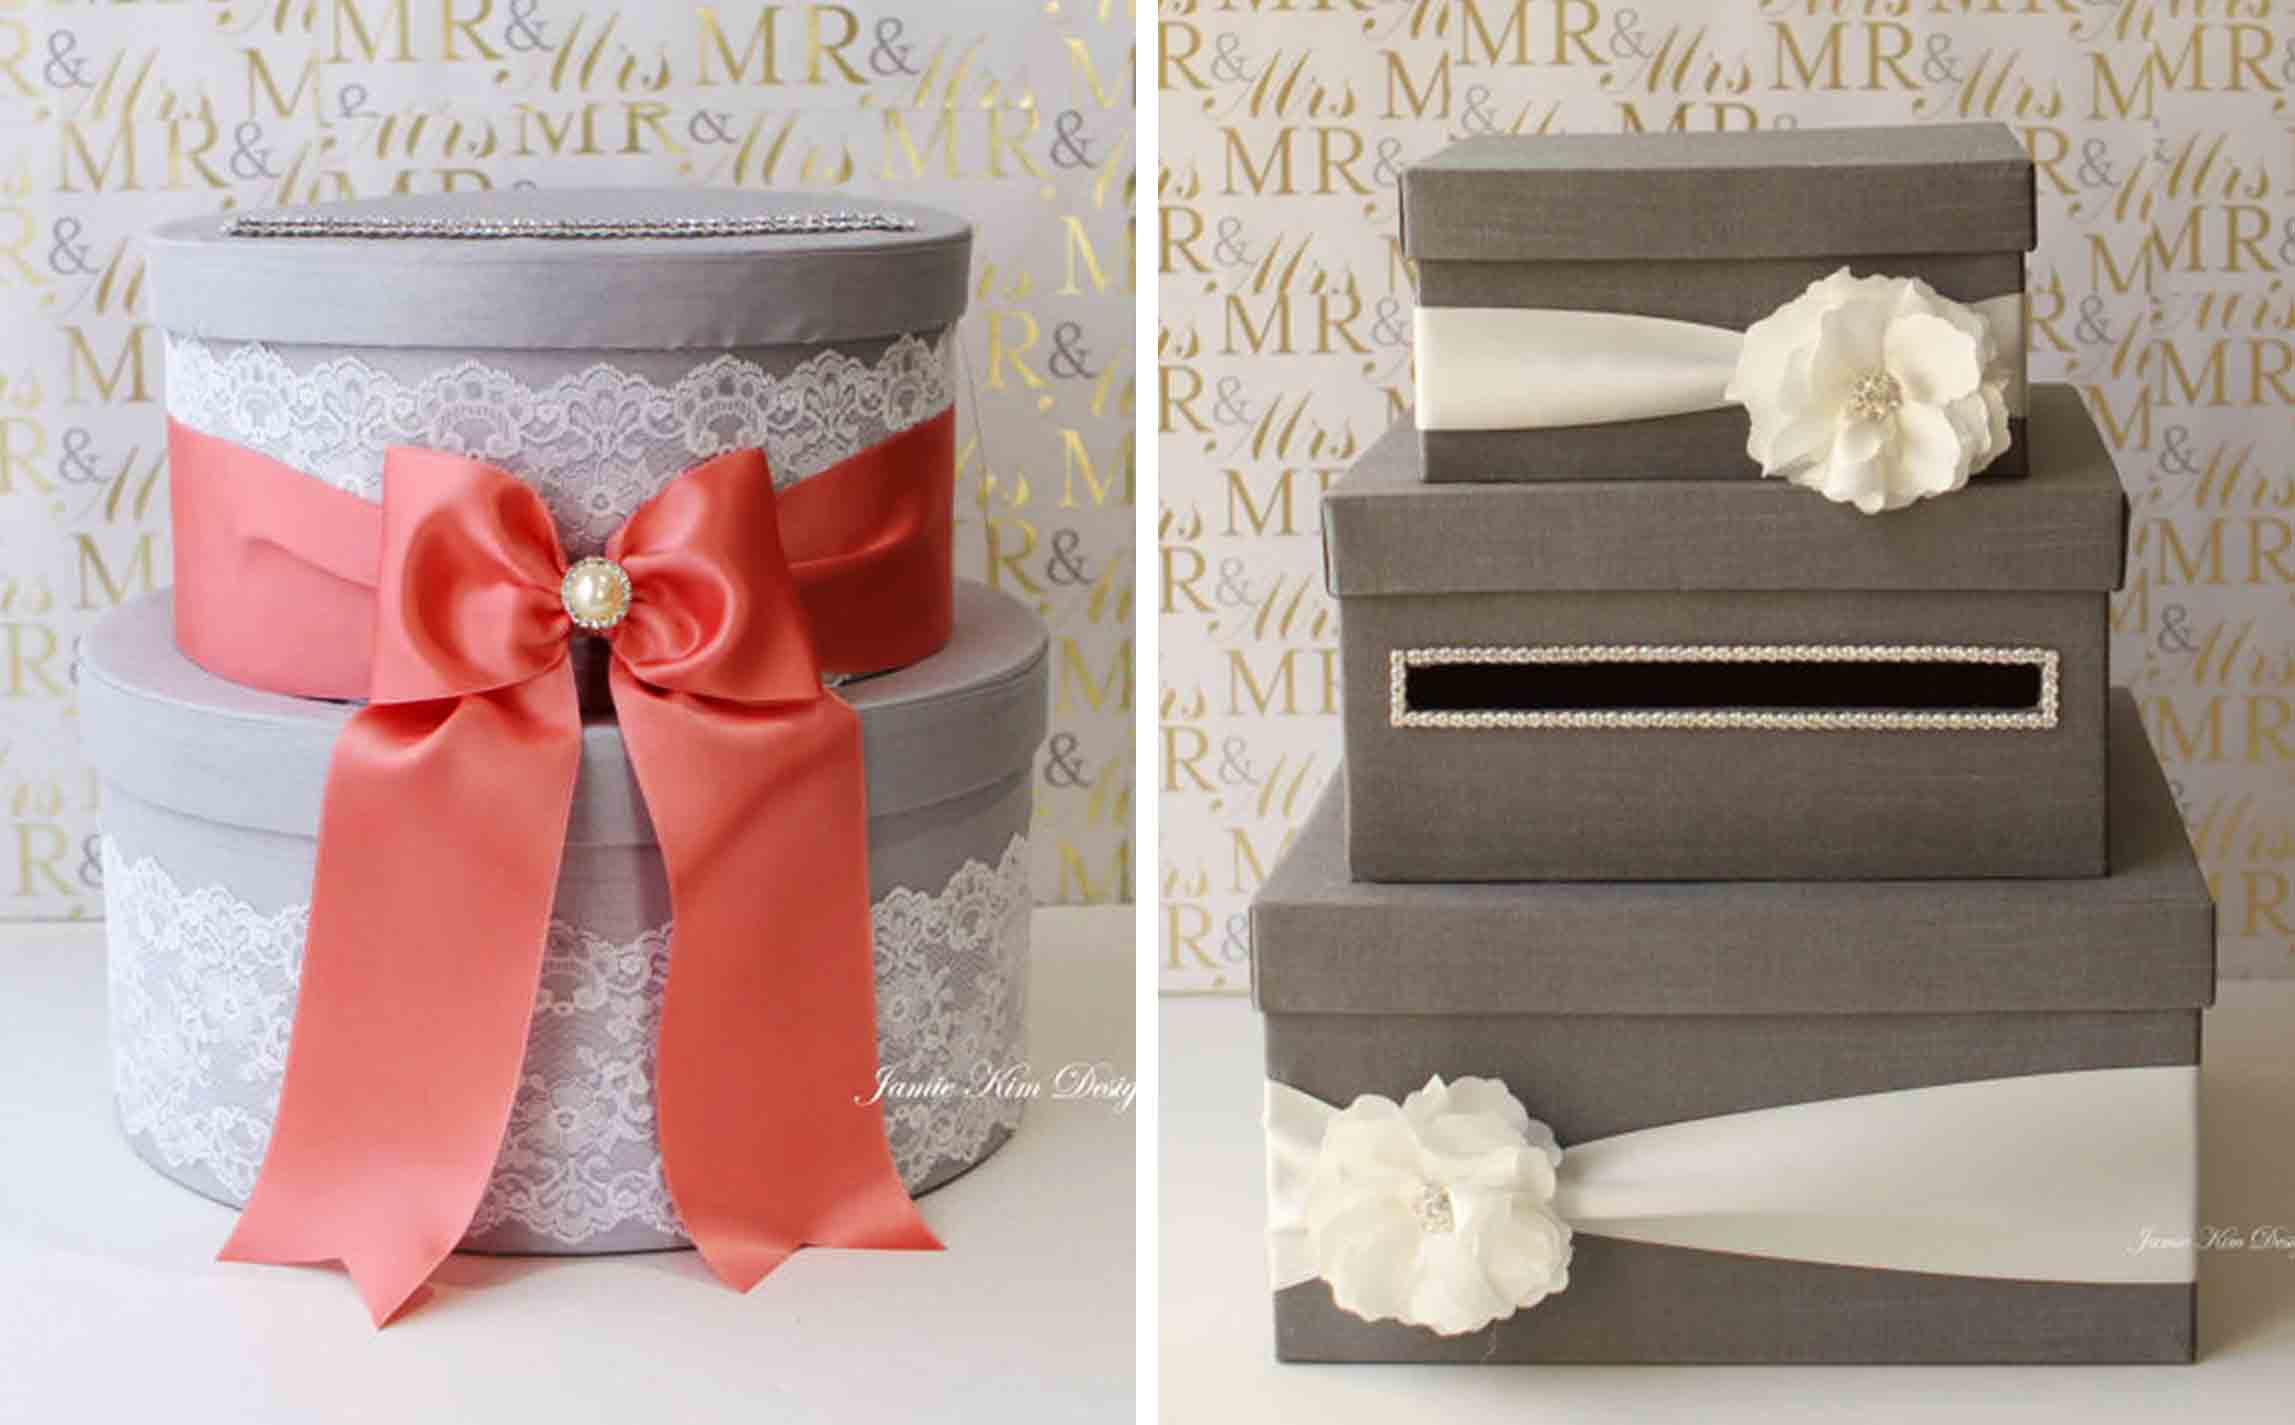 Wedding Gift Card Box
 18 DIY Wedding Card Boxes For Your Guests To Slip Your